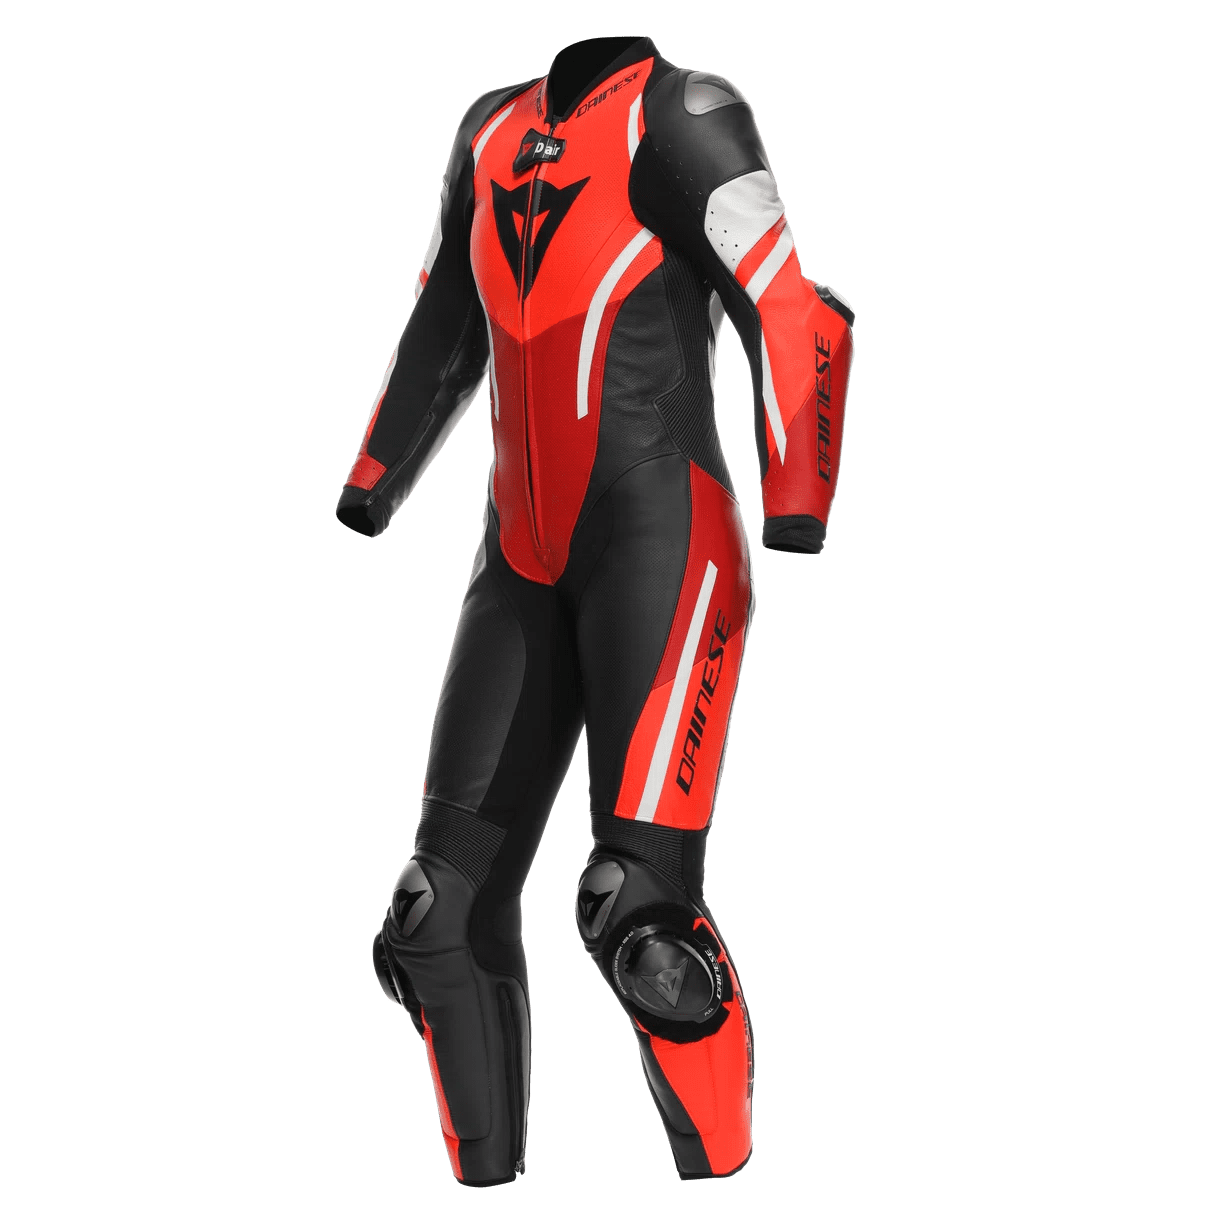 MISANO 3 PERFORATED 1PC LEATHER SUIT WMN BLACK/RED/FLUO-RED